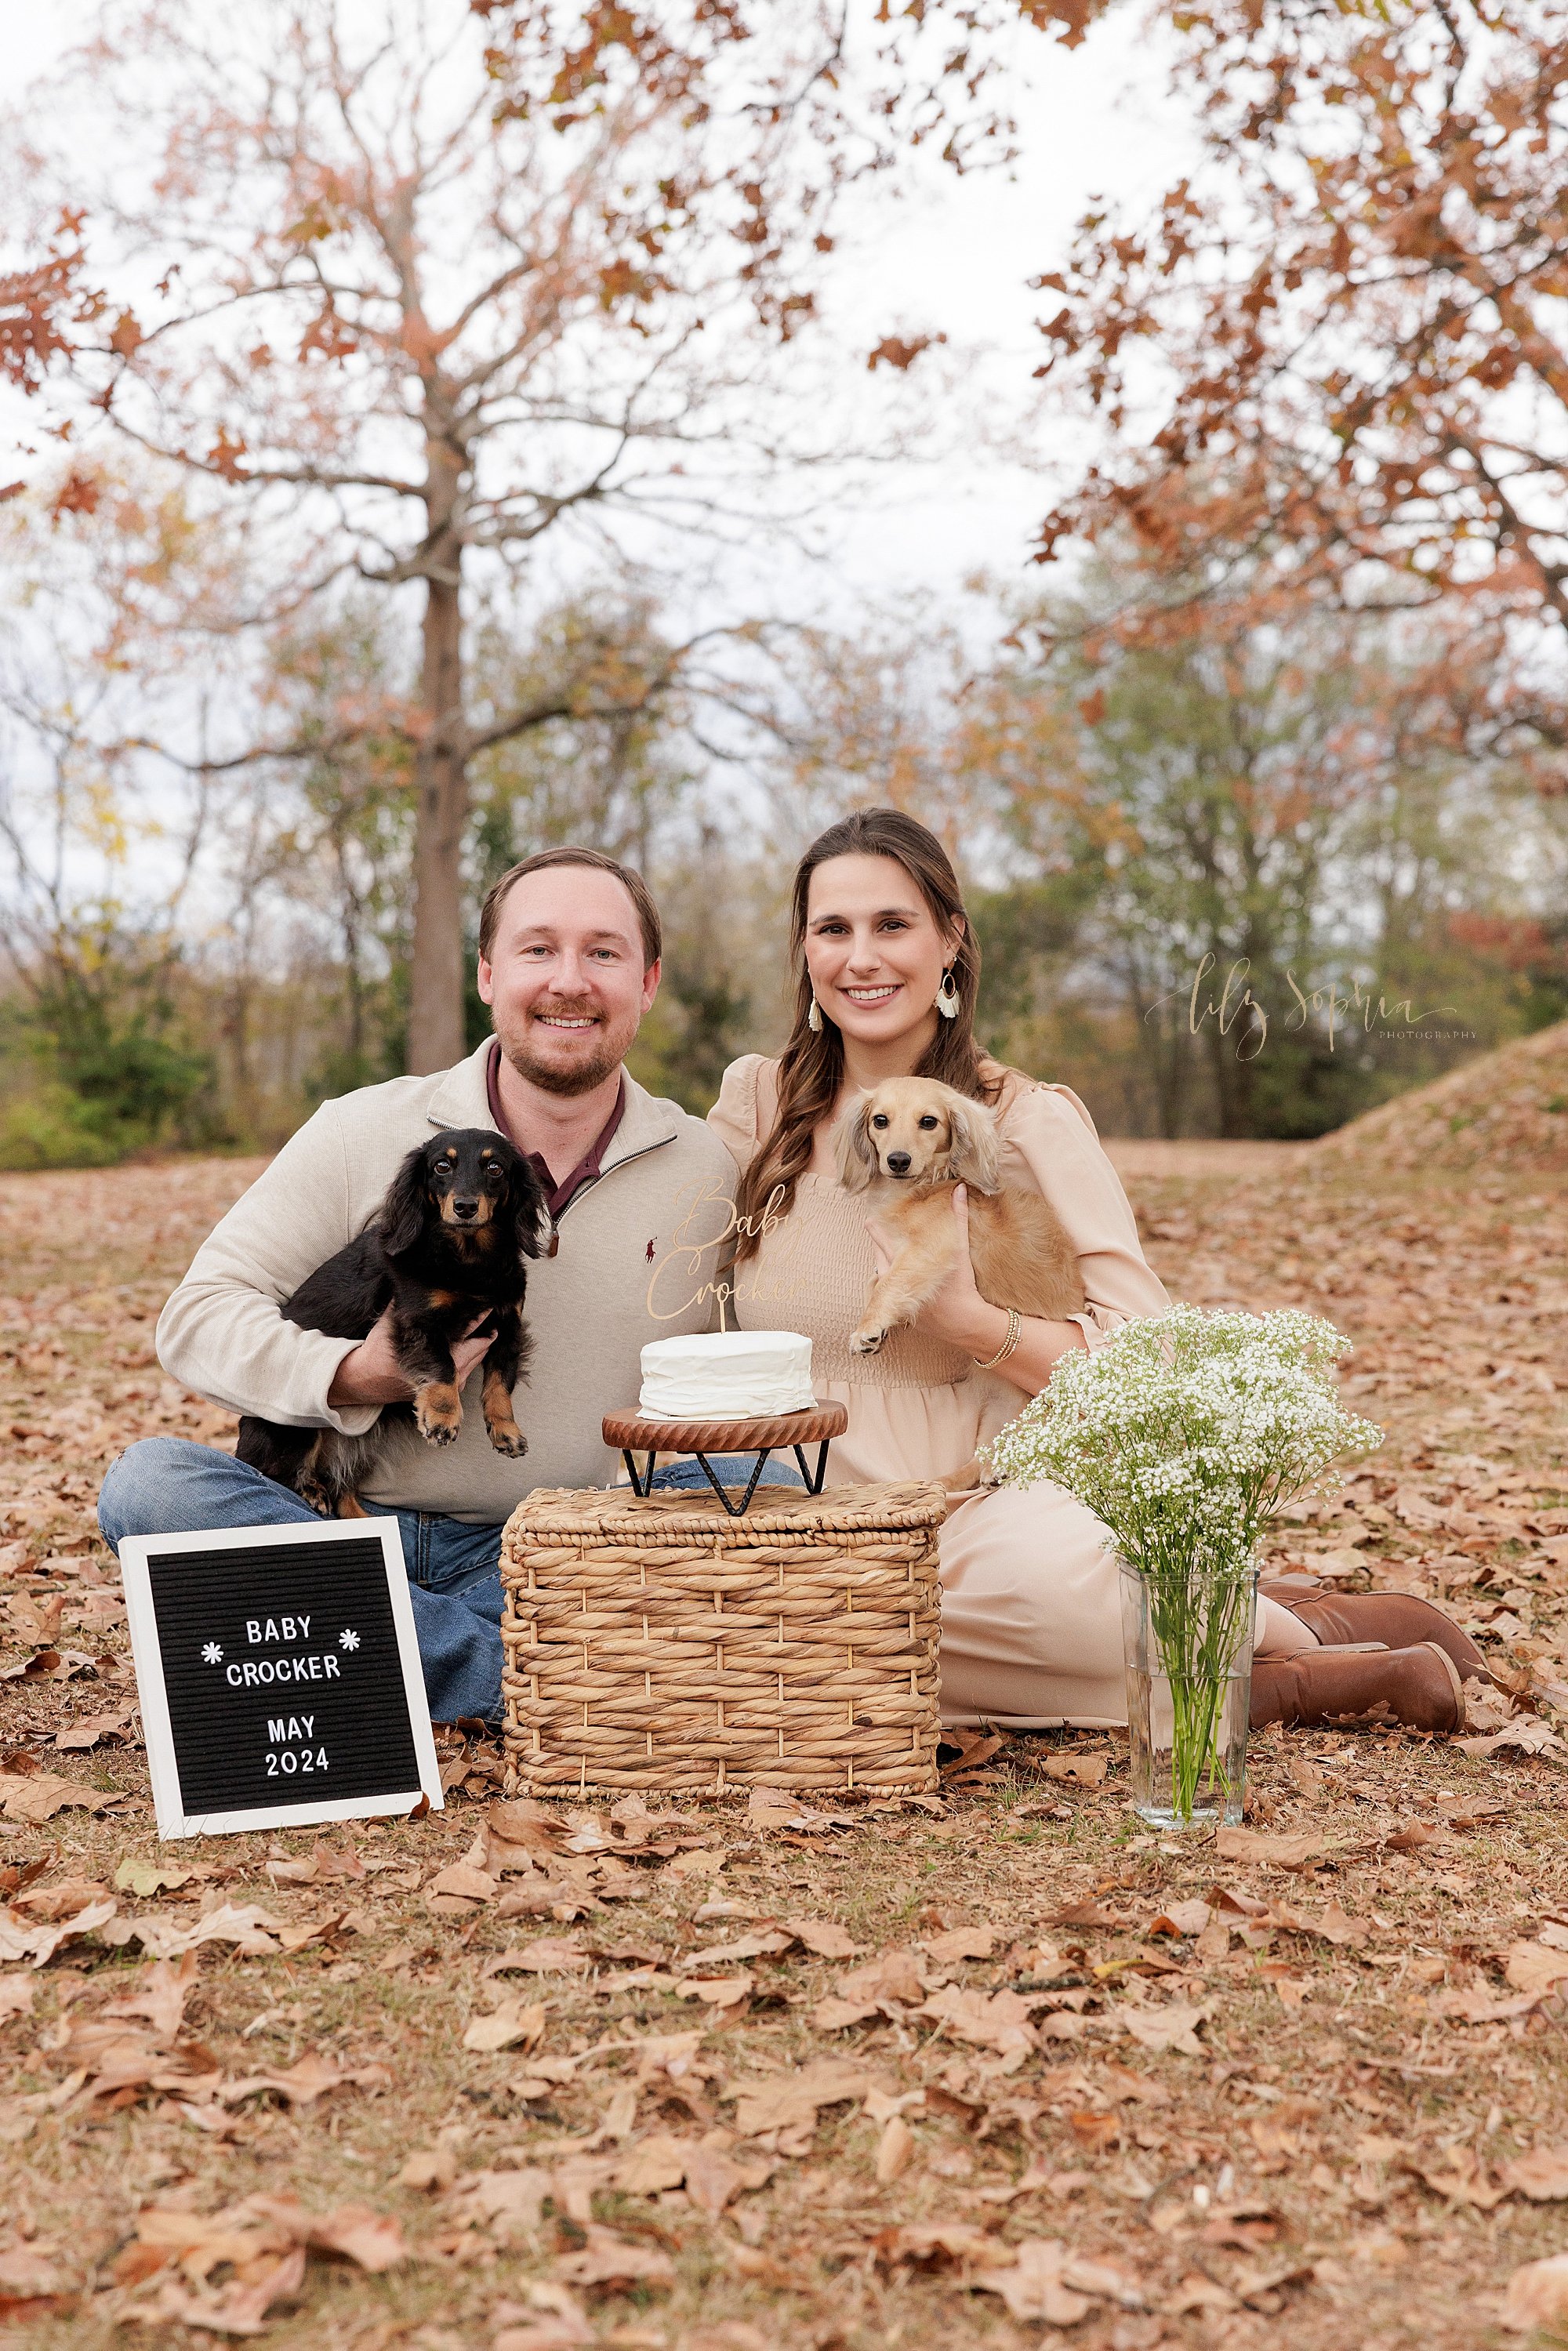 intown-atlanta-morningside-decatur-brookhaven-buckhead-outdoor-couples-maternity-fall-photoshoot-daschunds-doxies-gender-reveal_6179.jpg